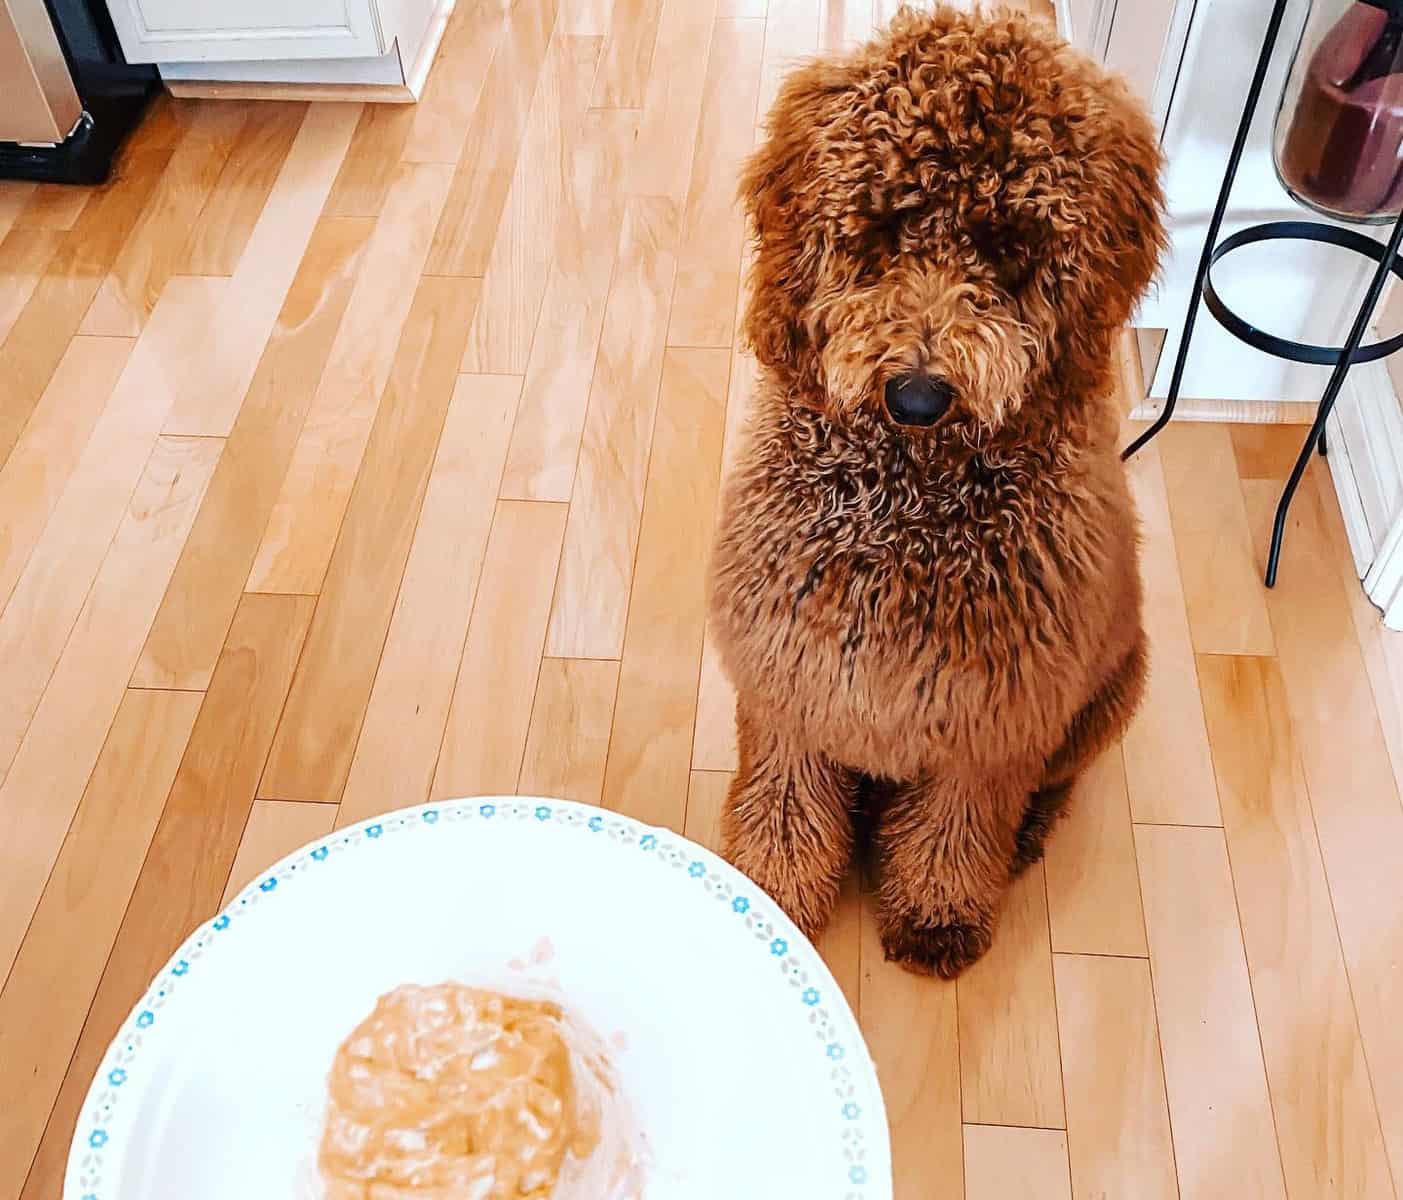 A Red Goldendoodle got a birthday treat